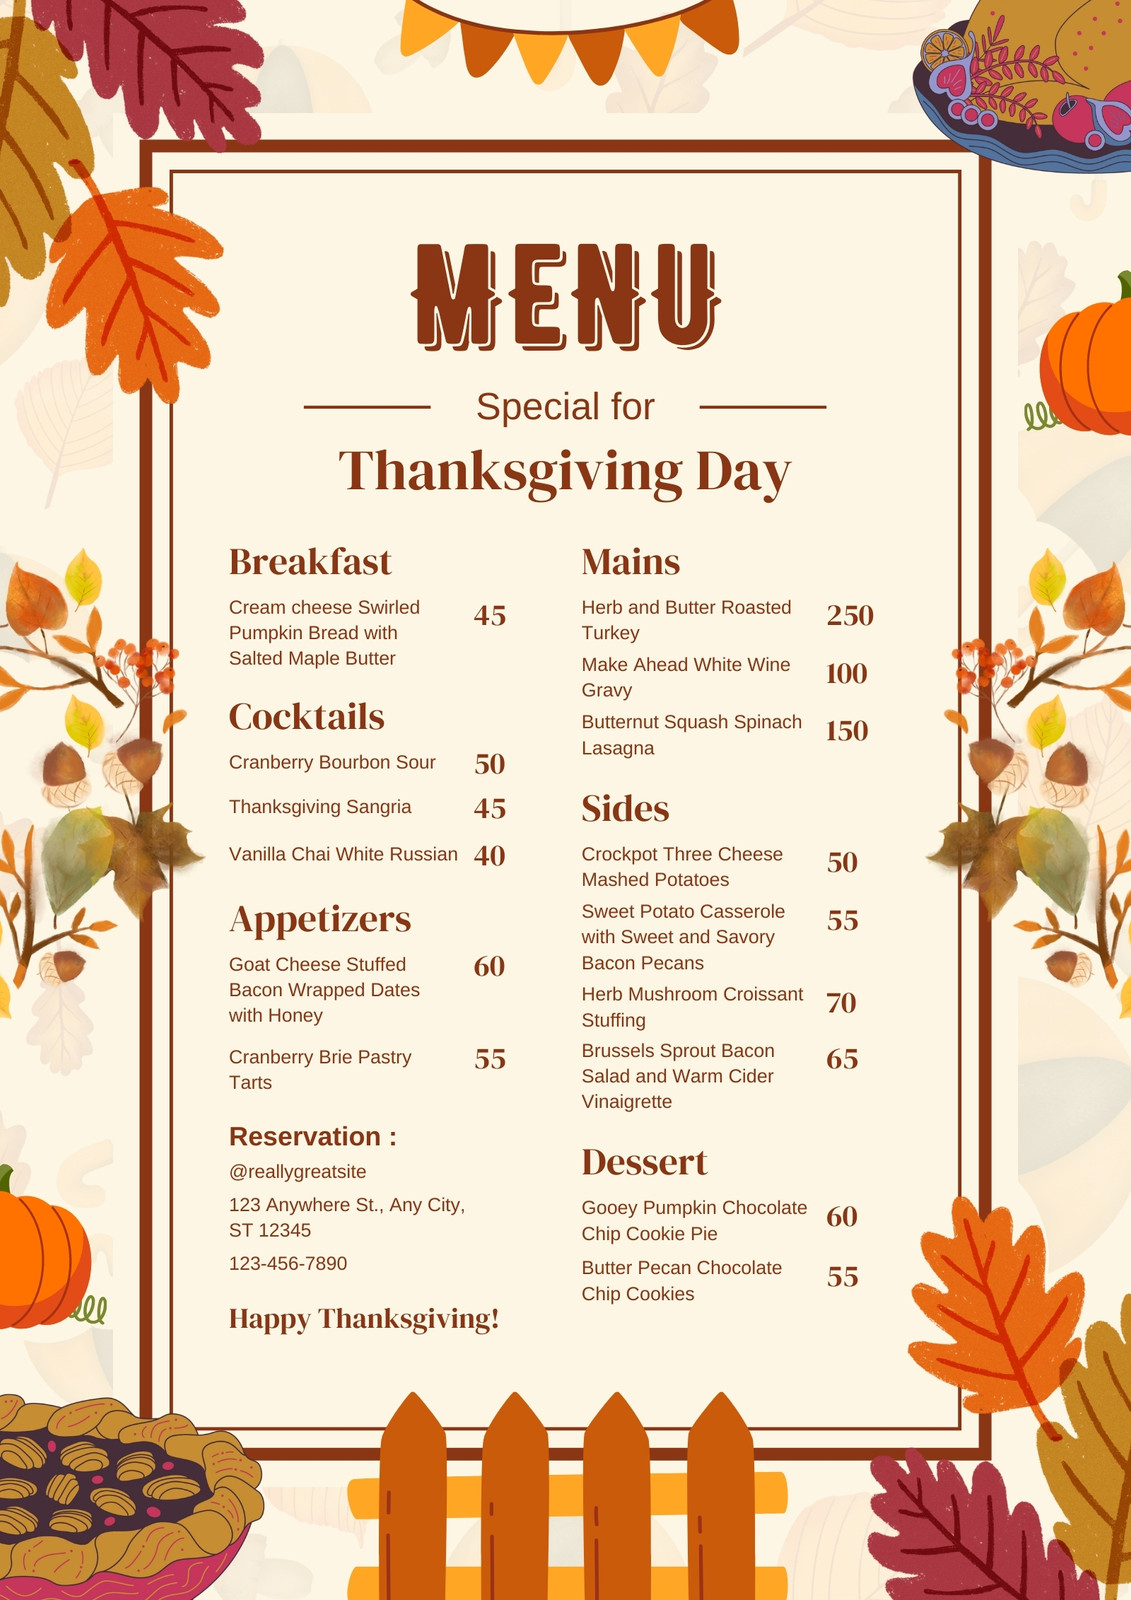 Free and customizable thanksgiving templates